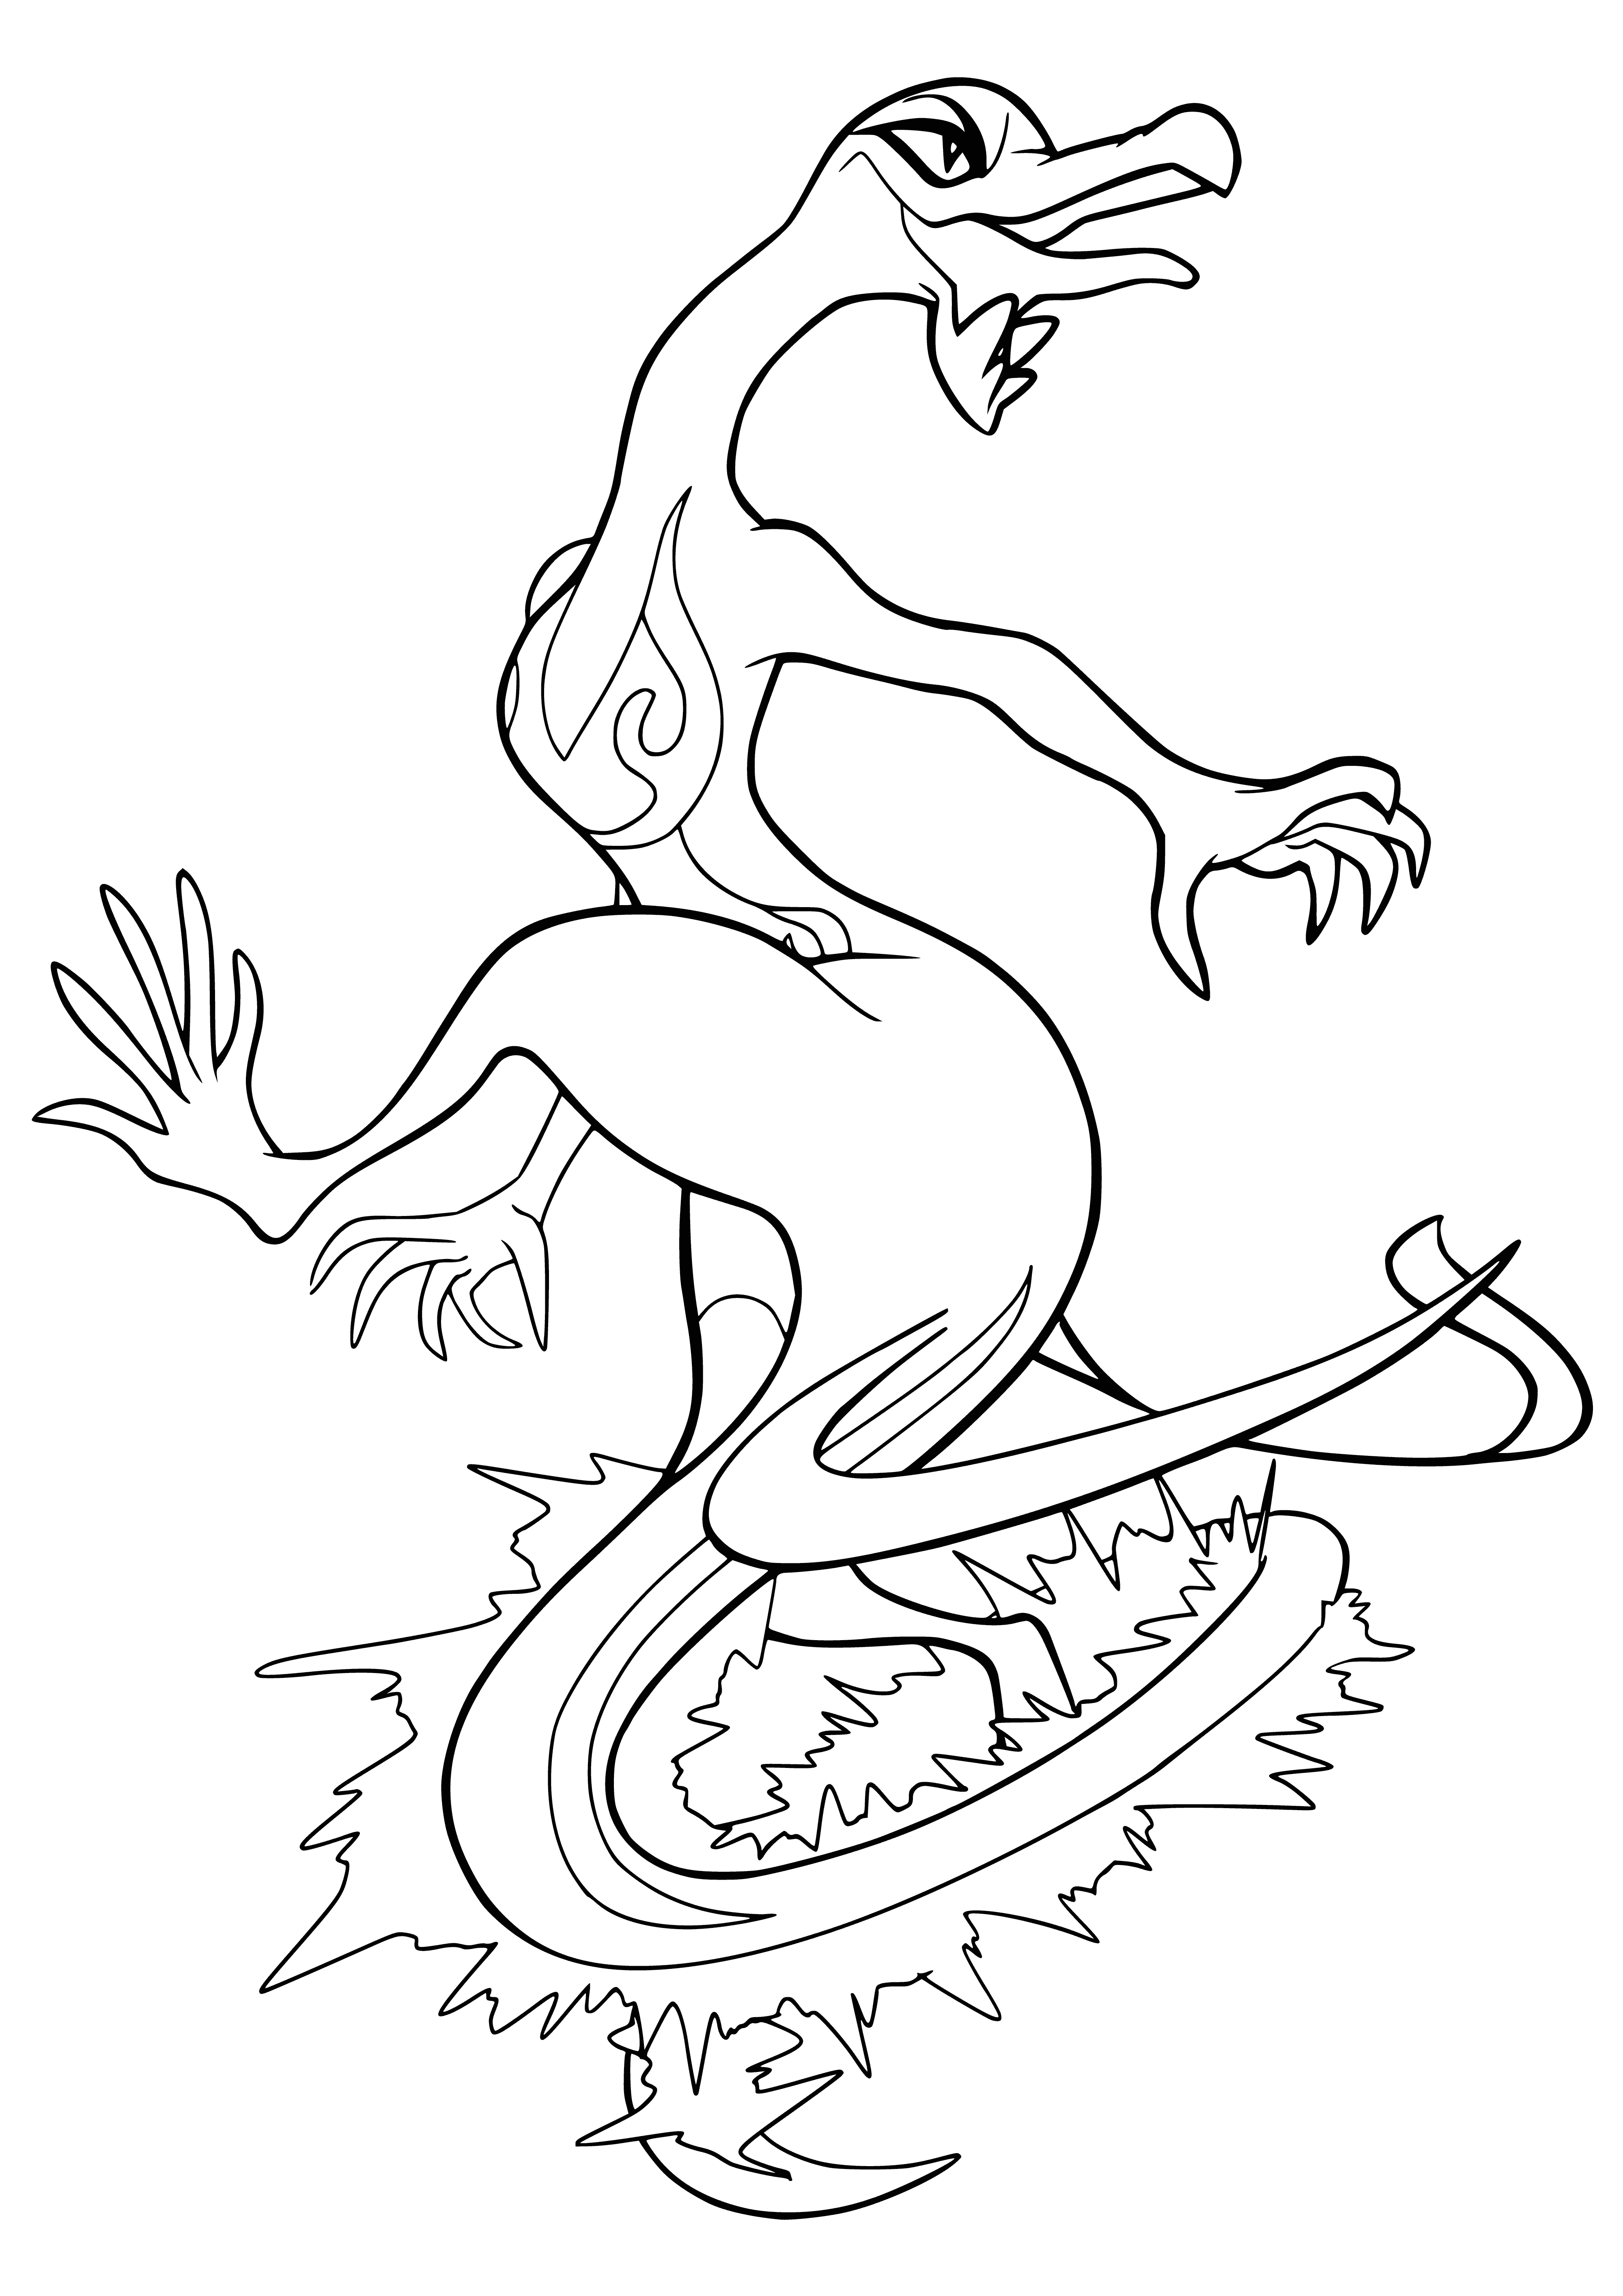 coloring page: Large, lizard Pokémon w/ red & black scales, horns, mane, black belly & webbed toes/fingers. 2 long, thin poisonous tails.